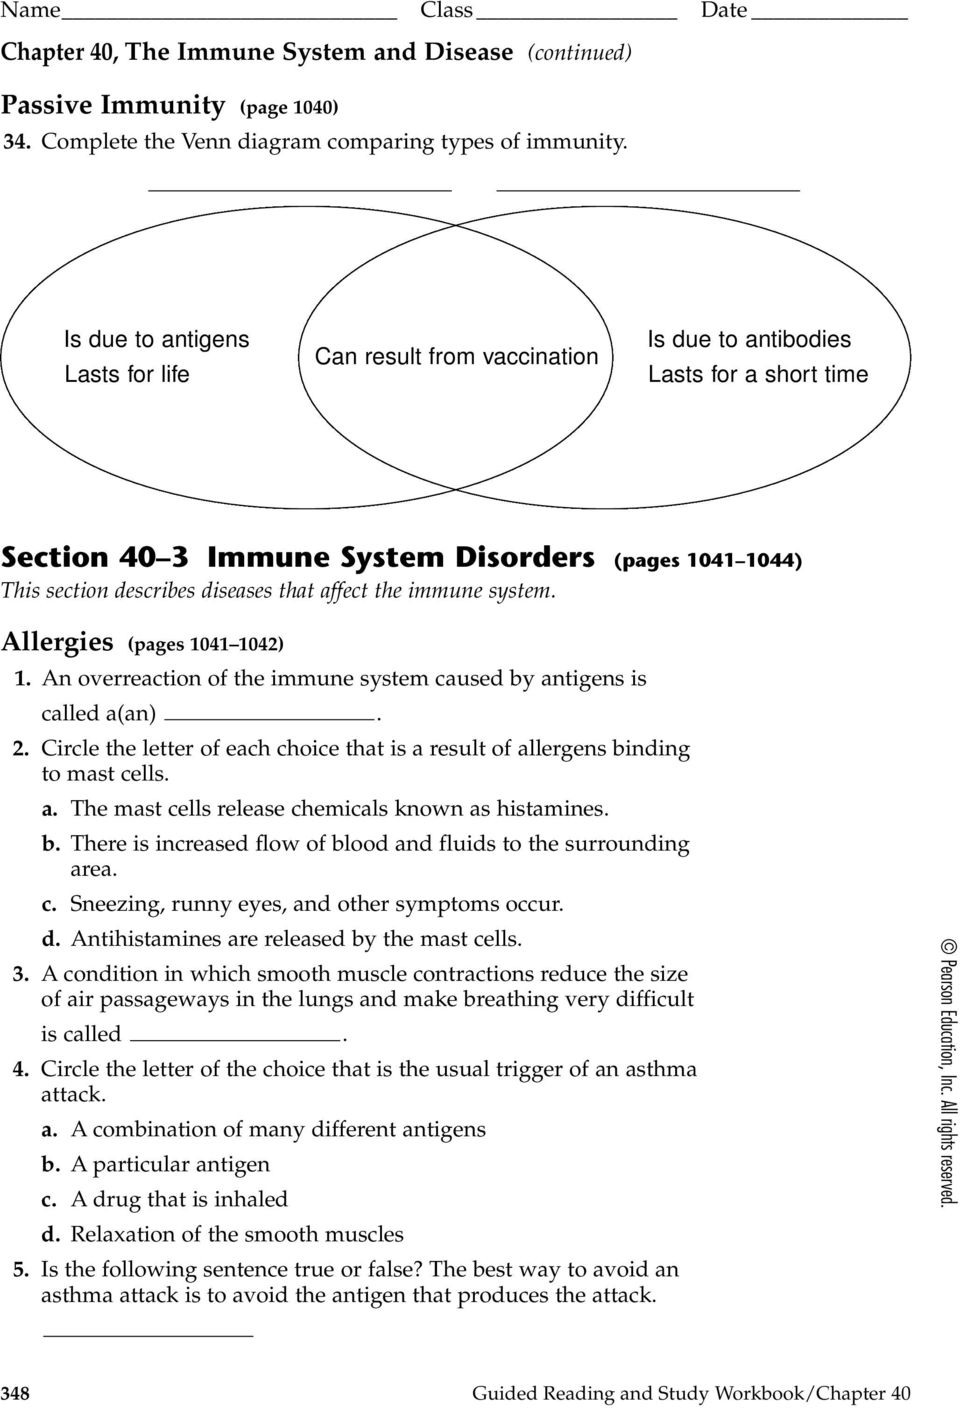 The Immune System And Disease  Pdf